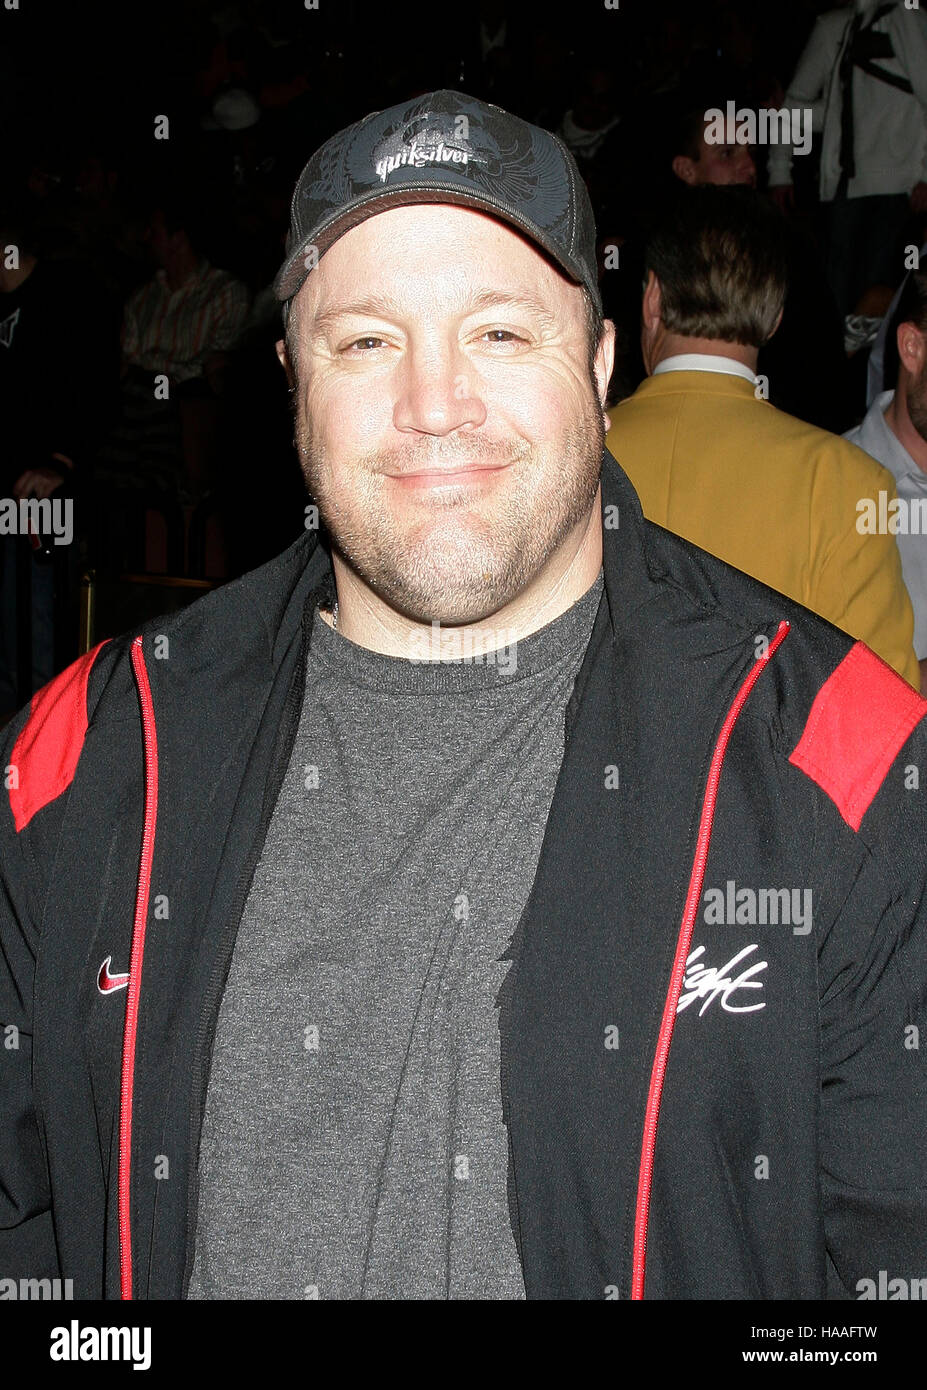 Actor Kevin James during UFC 79 at the Mandalay Bay Events Center in Las Vegas on Saturday, December 29, 2007. Photo credit: Francis Specker Stock Photo